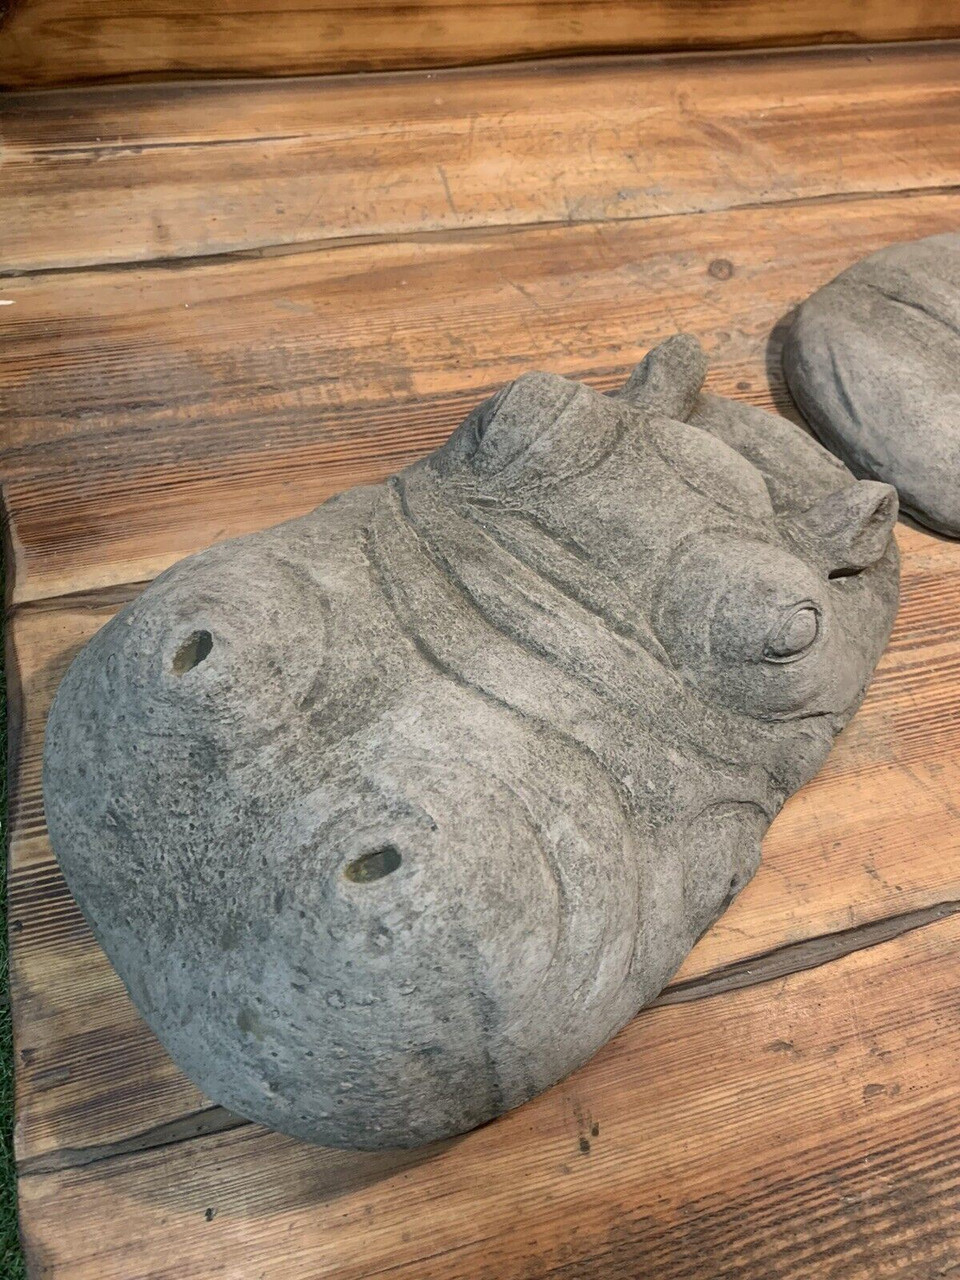 STONE GARDEN EXTRA LARGE 2 PIECE LAYING SUBMERGED HIPPO STATUE ORNAMENT